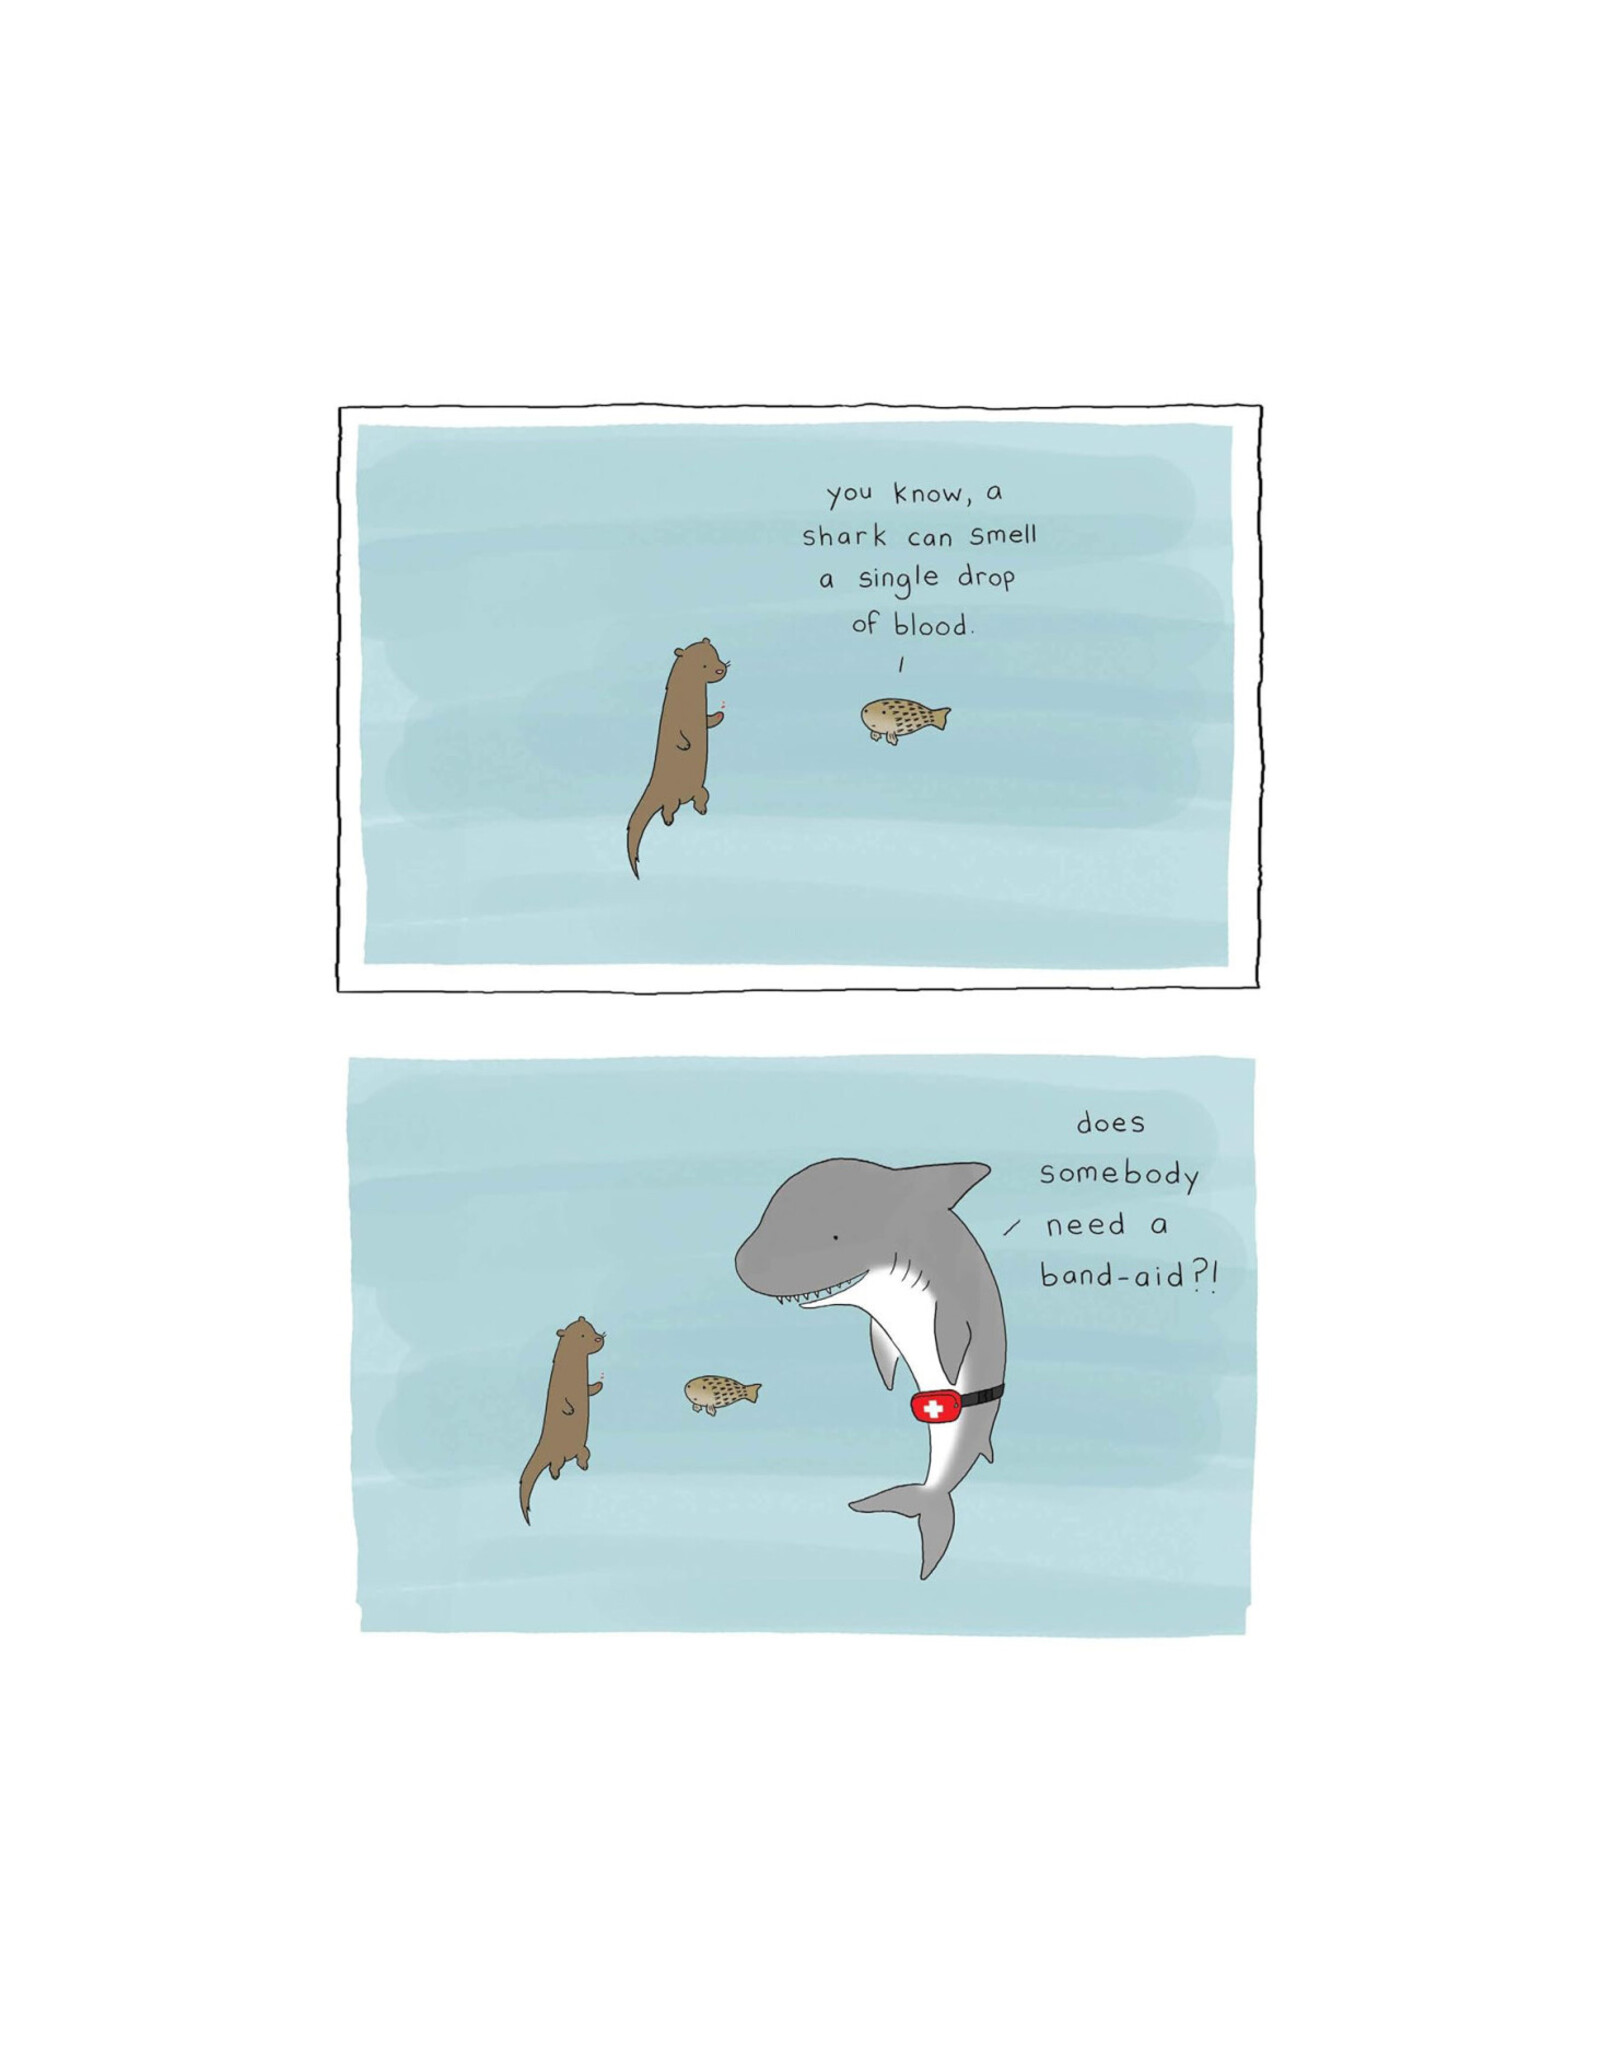 The Little World of Liz Climo Postcards